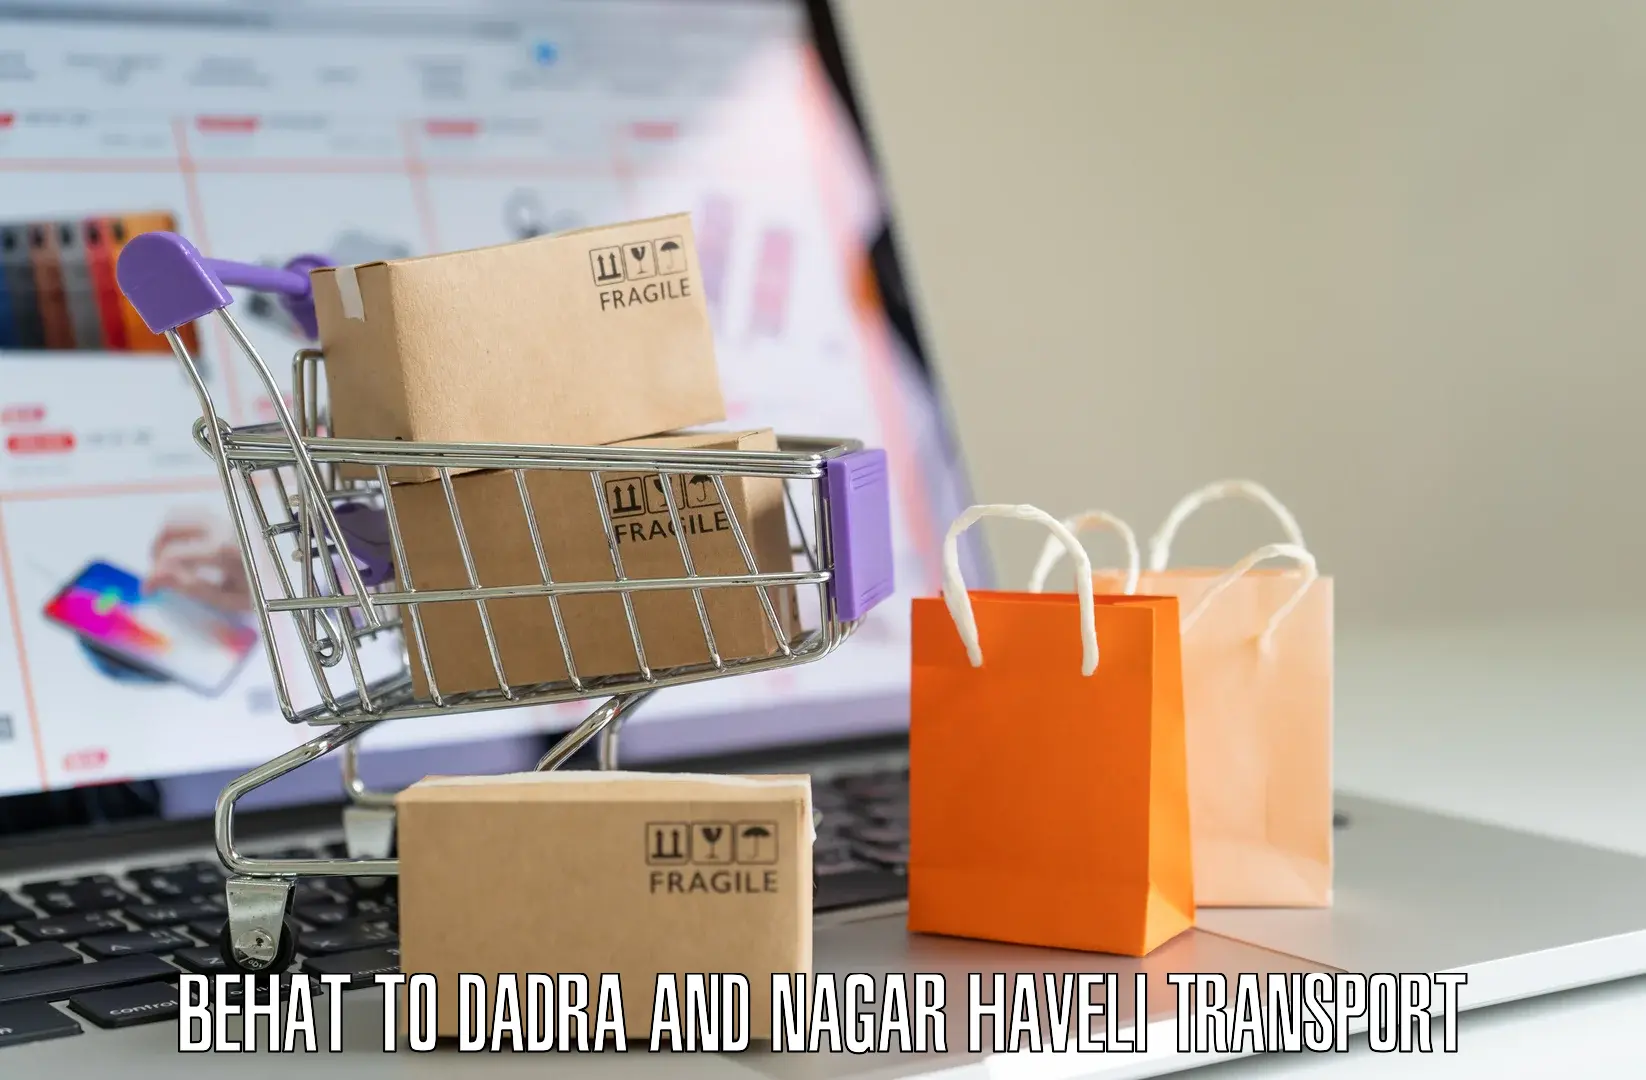 Daily parcel service transport Behat to Dadra and Nagar Haveli